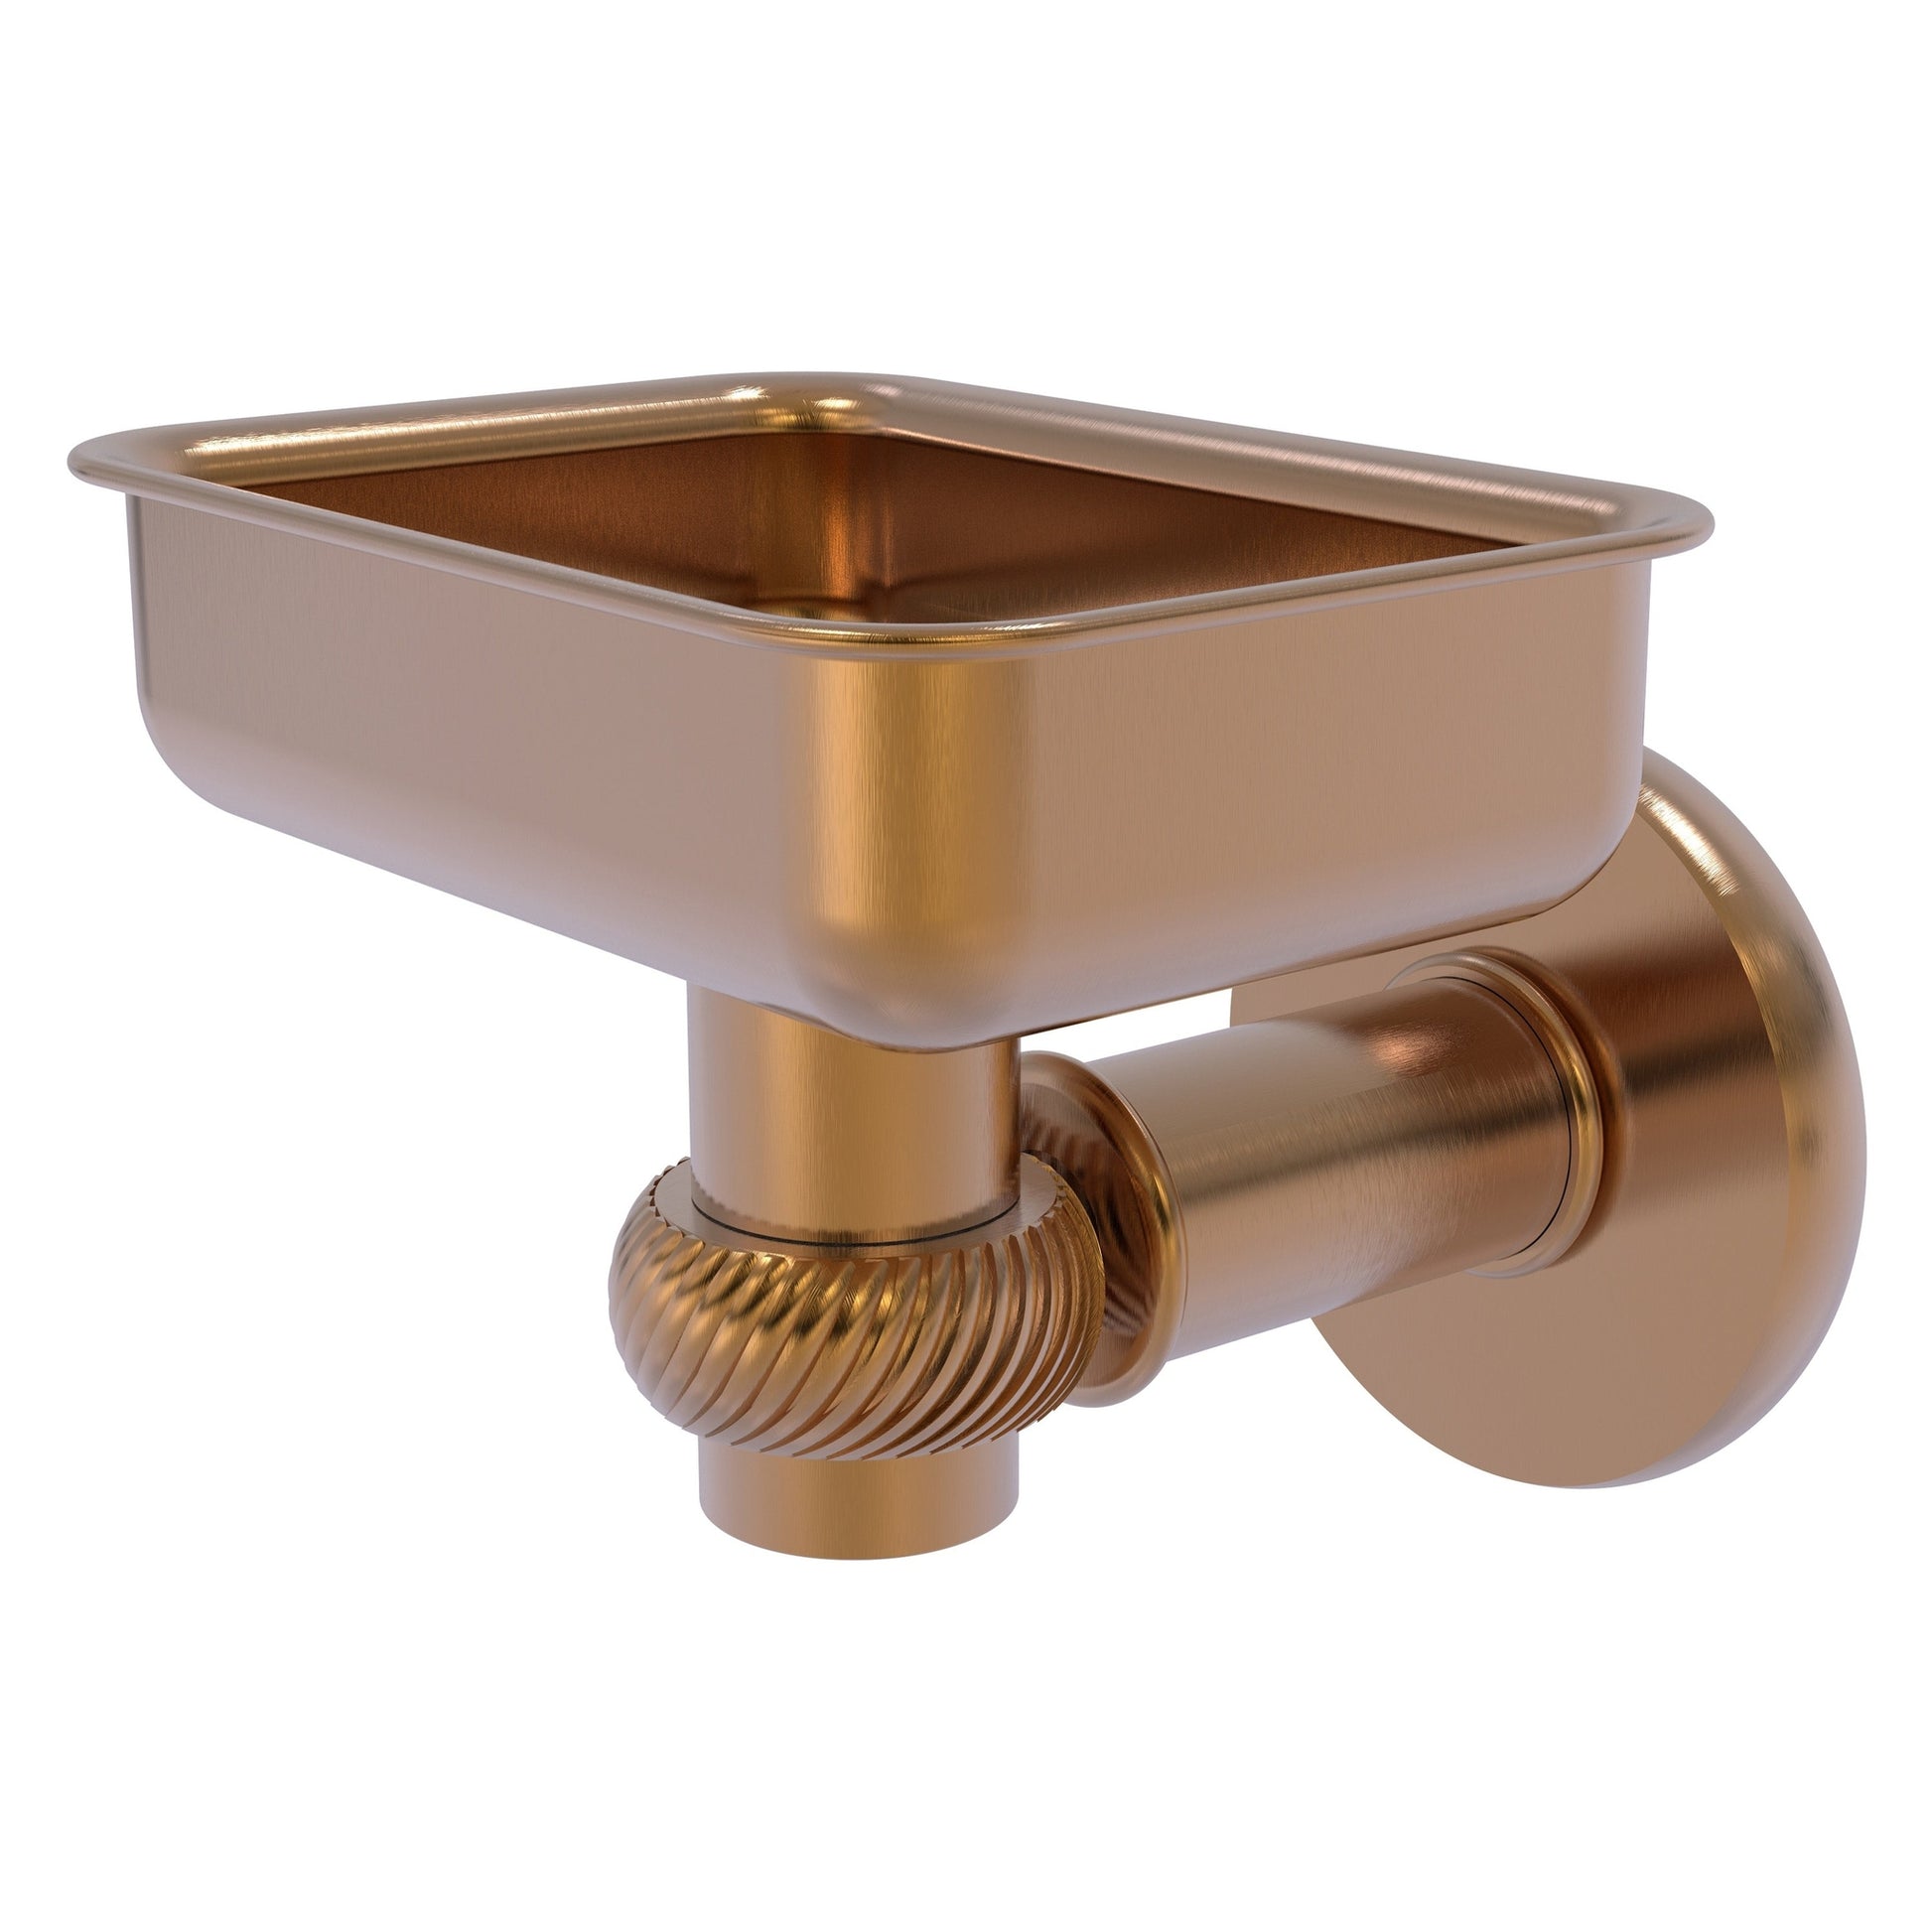 Allied Brass Continental 4.5" x 3.5" Brushed Bronze Solid Brass Wall-Mounted Soap Dish Holder with Twist Accents